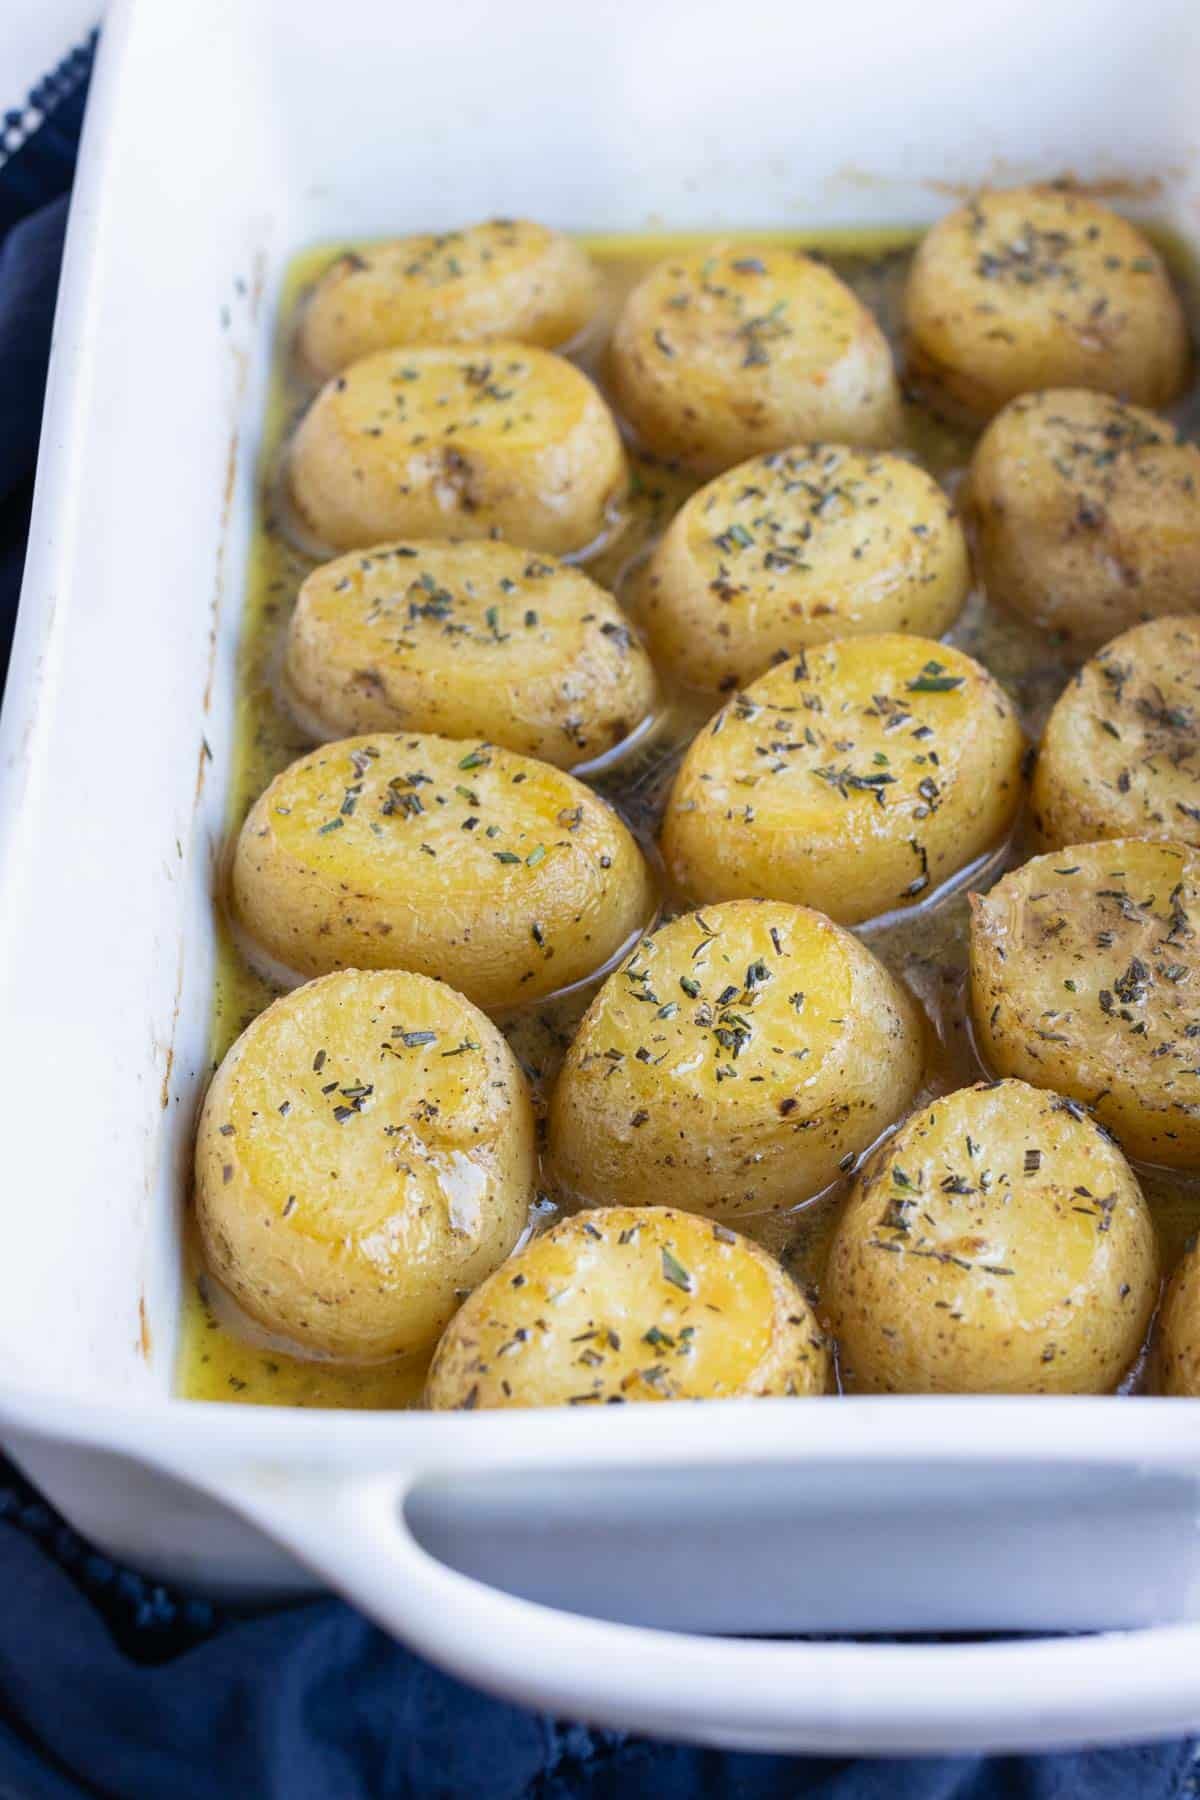 Potatoes are cooked in herb butter and then broth.